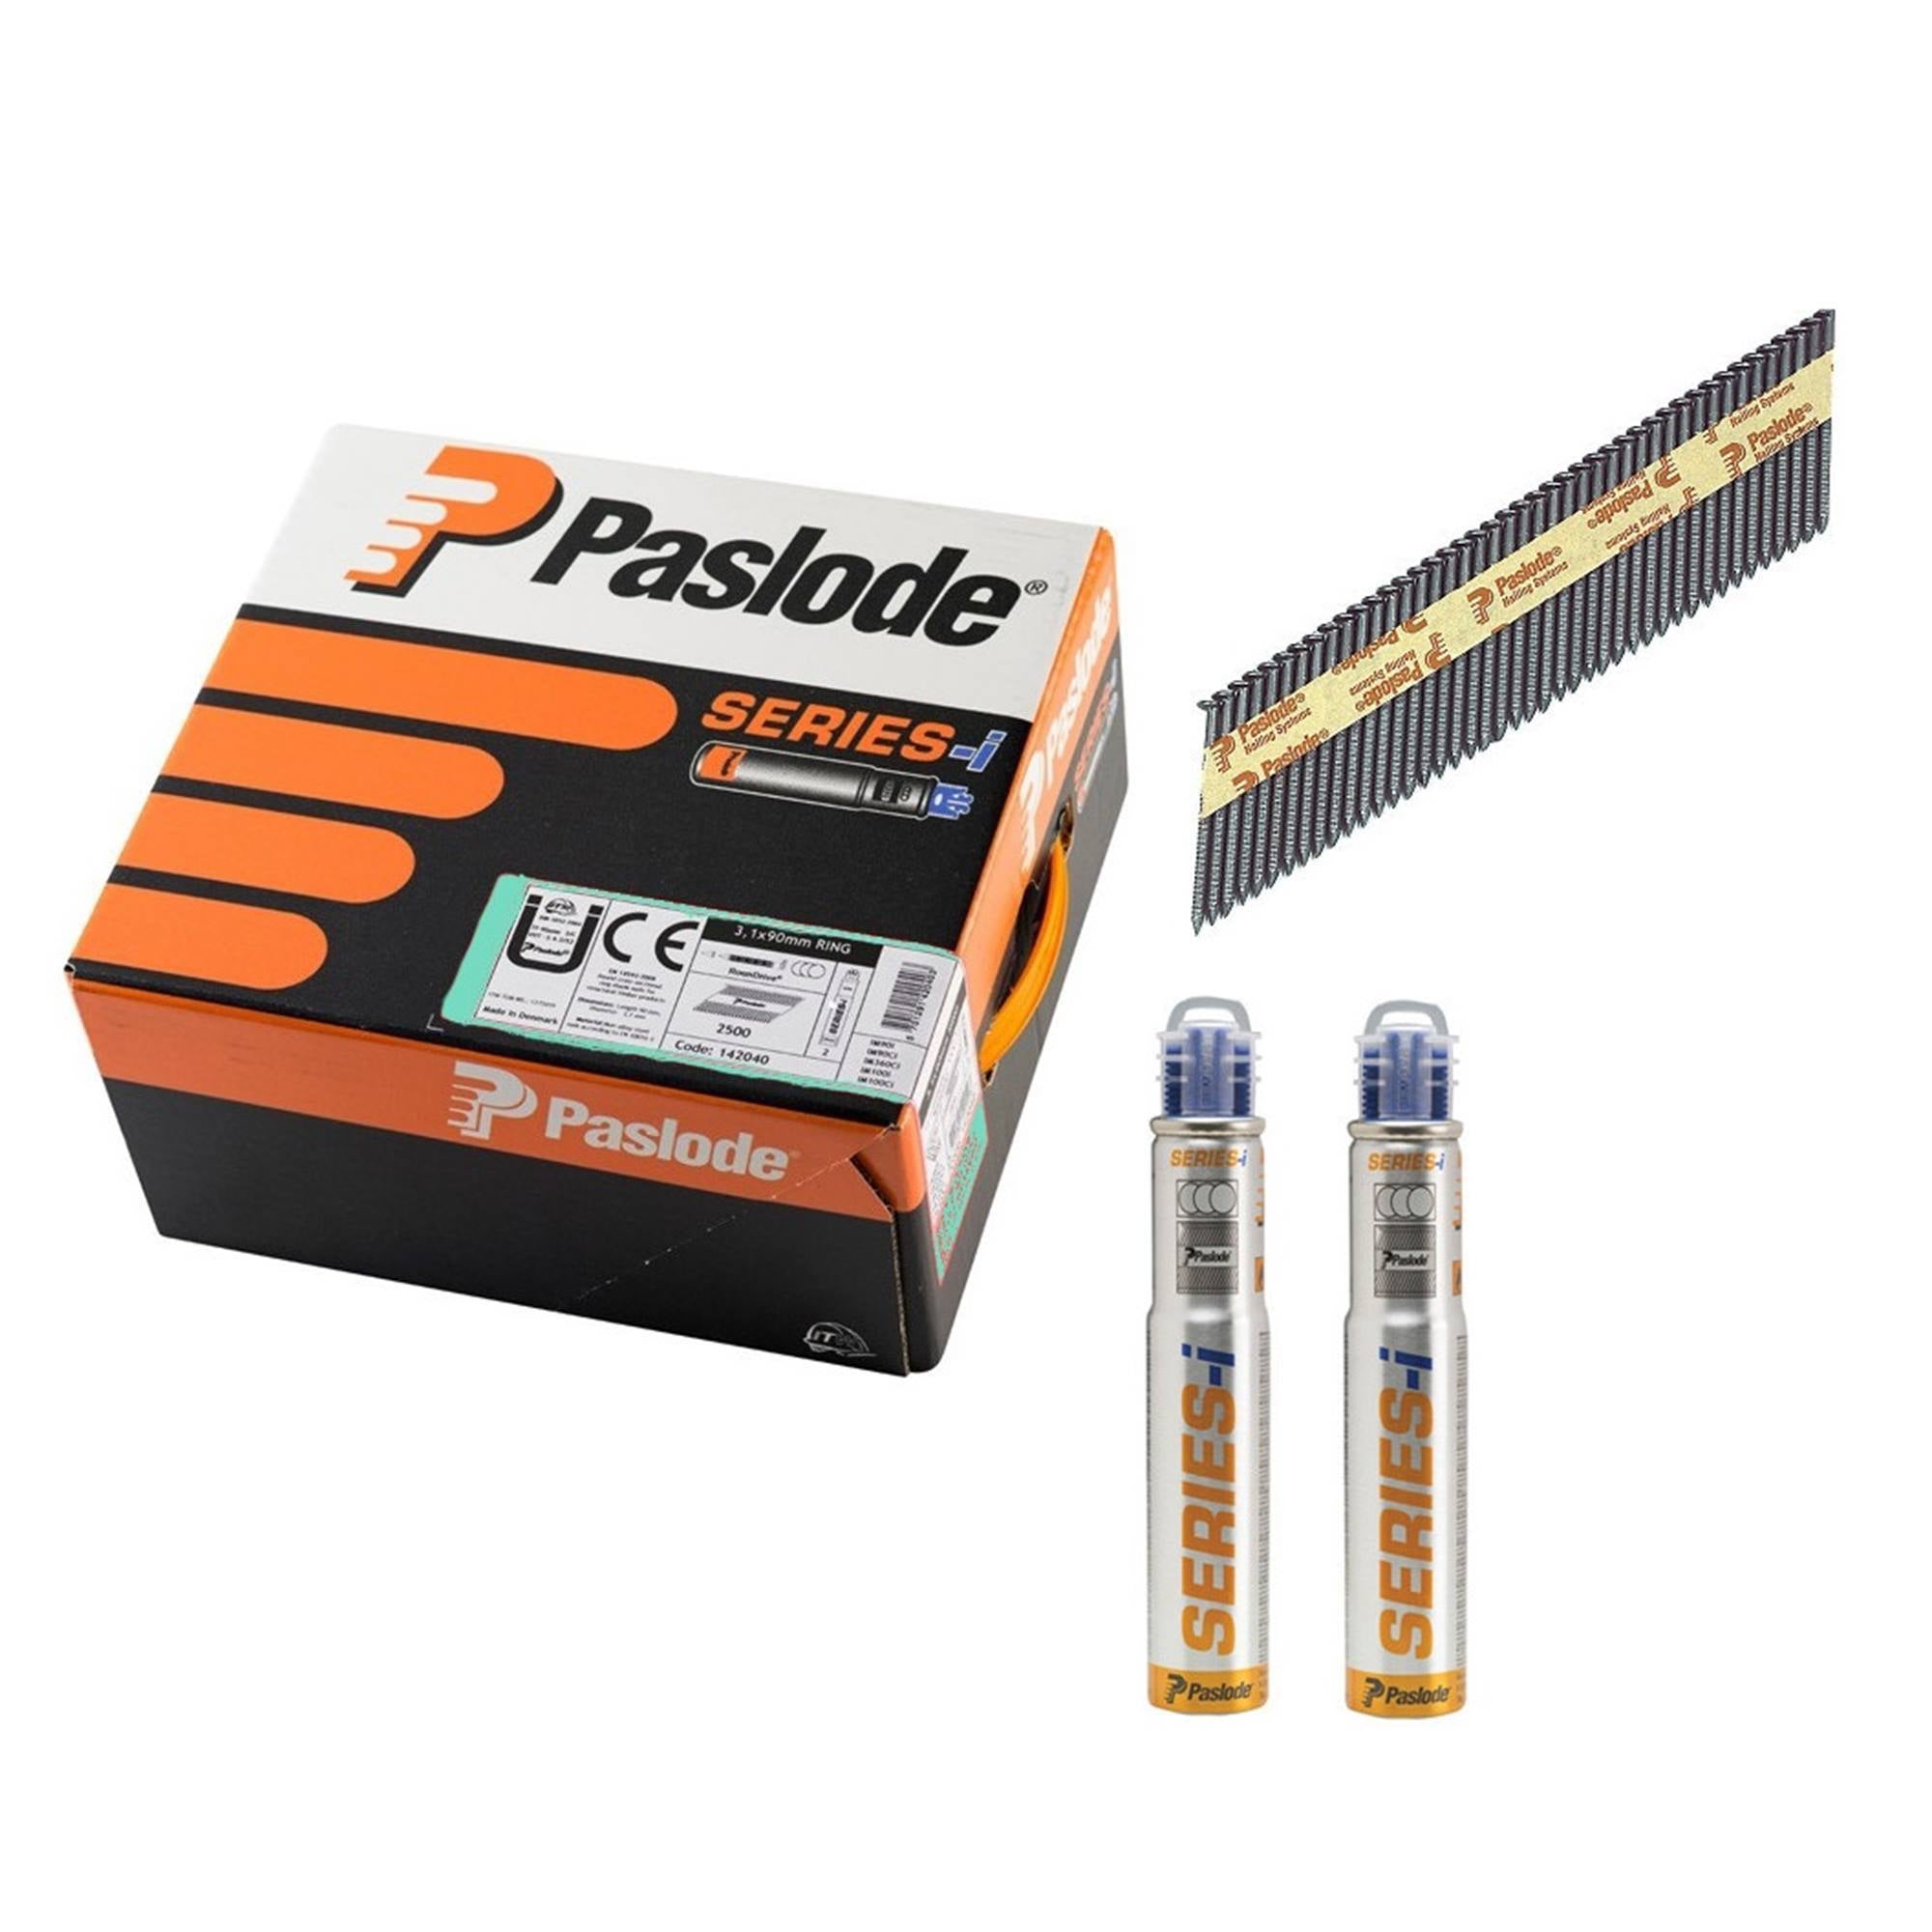 Paslode 1st Fix Nail 63mm x 3.1mm RG Galv Plus NFP (2200) For 360Xi Main Image